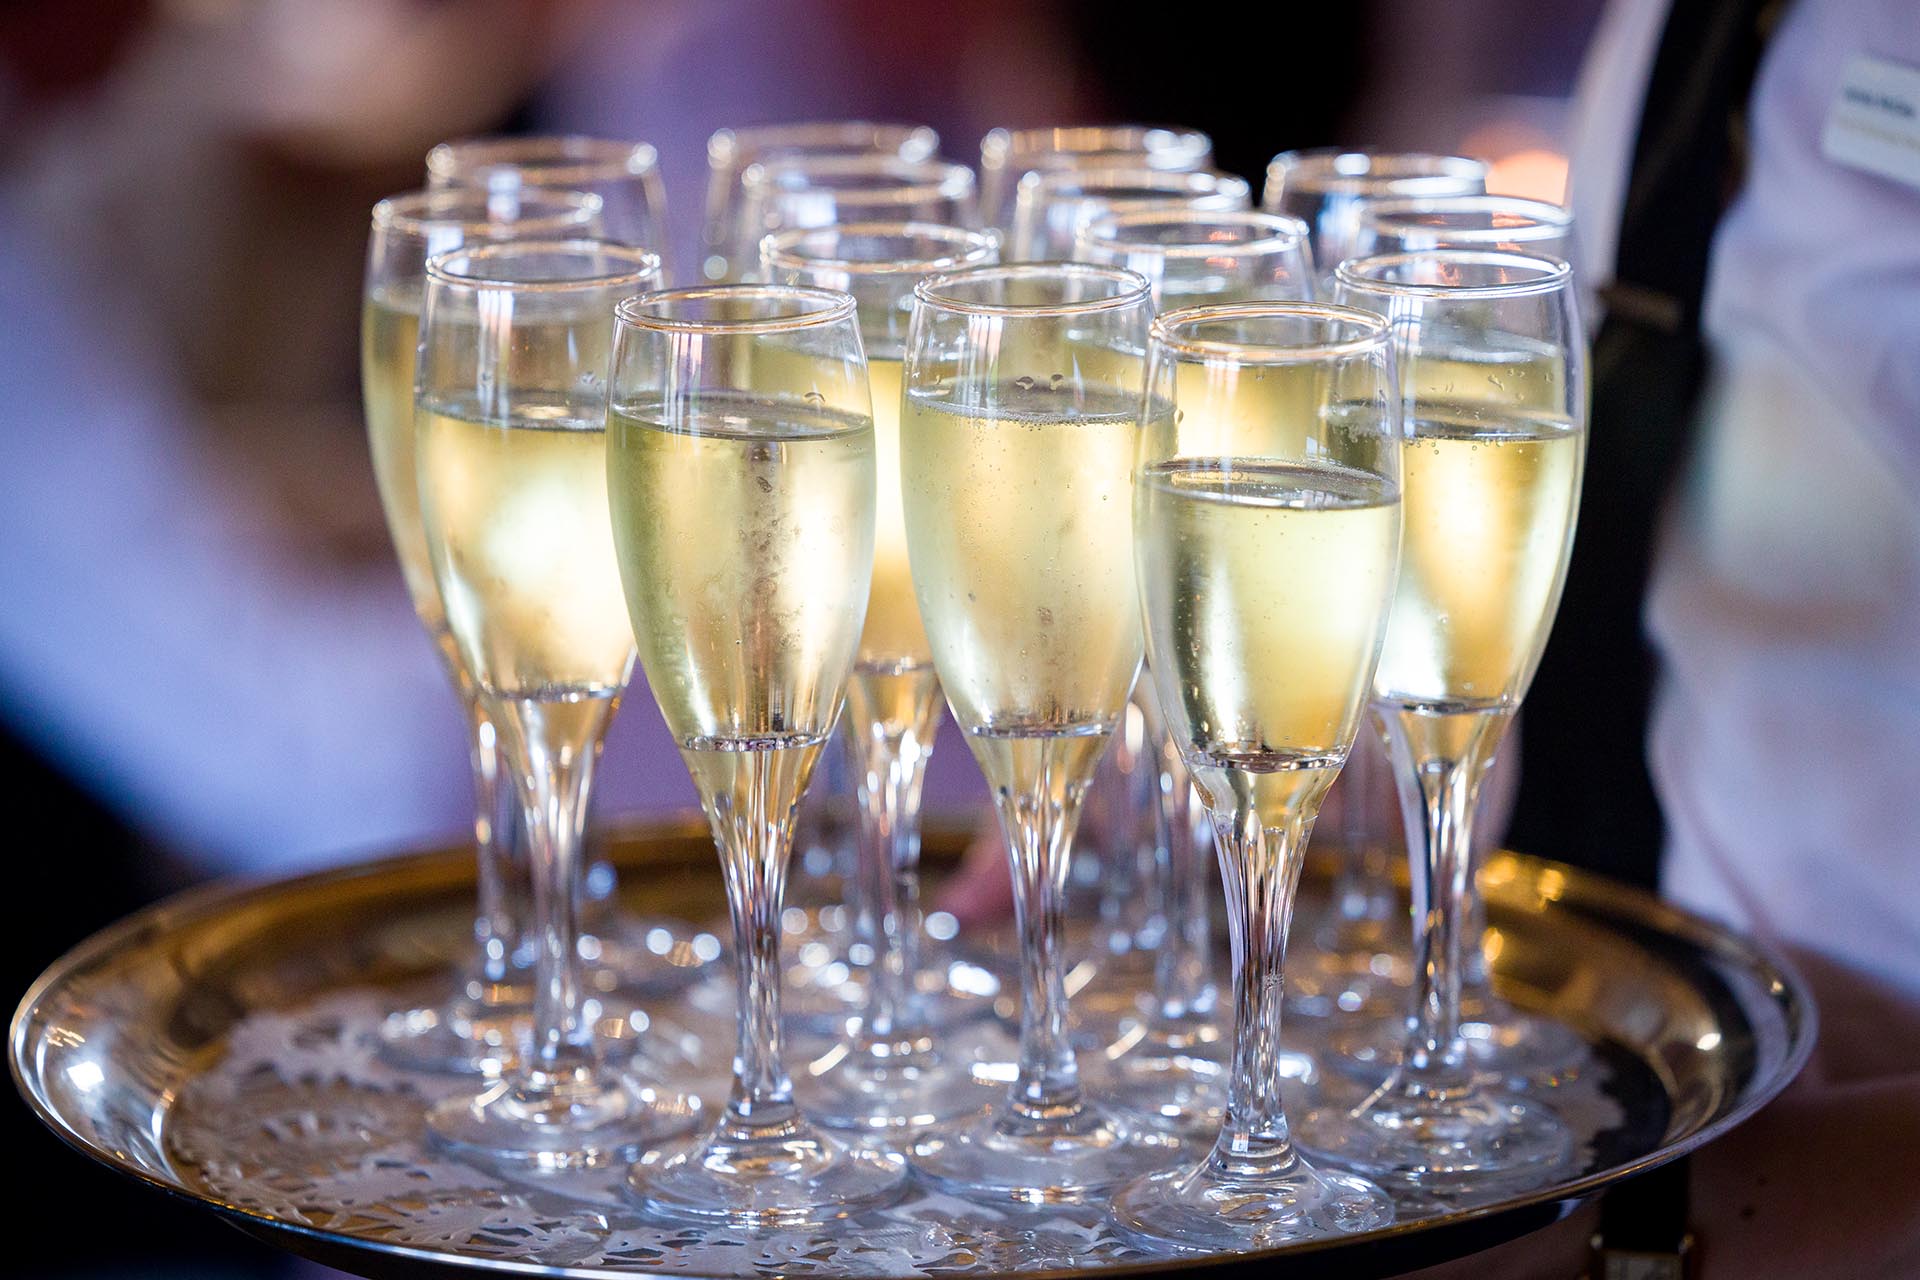 Full champagne flutes during wedding breakfast at Leez Priory, Great Leighs, Chelmsford, by Essex wedding photographer